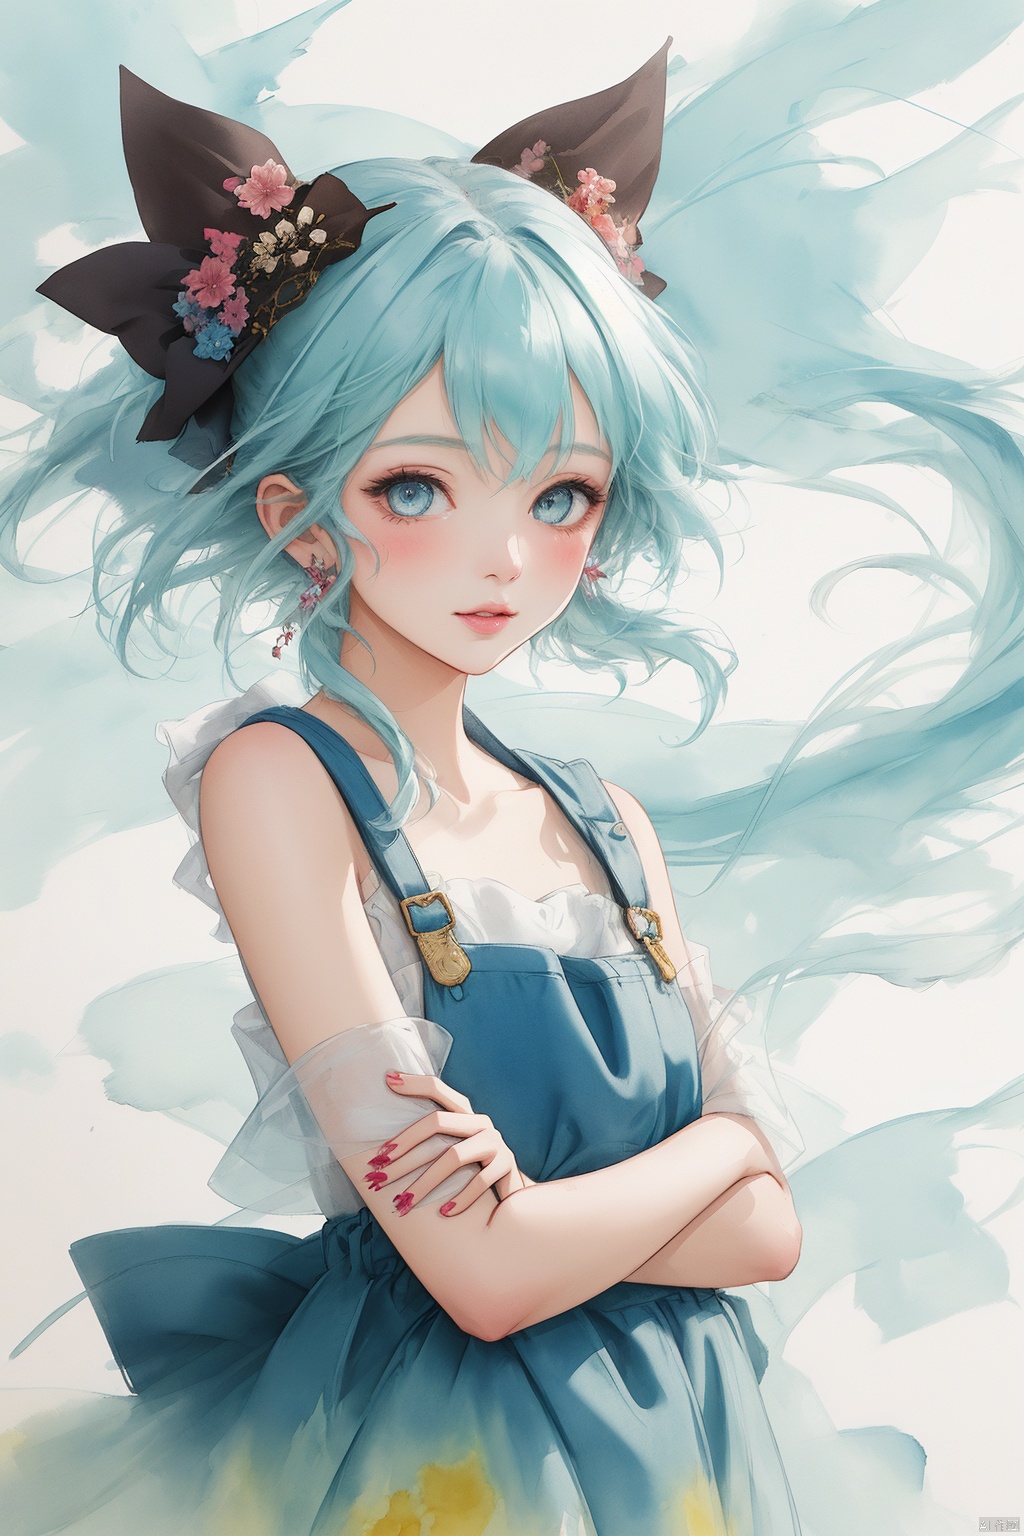 An illustration of a girl painted on paper, combining the vibrant colors of watercolor with the elegance of ink wash painting.  The art form takes inspiration from the whimsical charm of manga, infusing it with the organic flow of watercolor pigments.  Created with brushes and ink, the image showcases the beauty of fluid lines and translucent hues.  The focus is on the girl's graceful posture and expressive features, capturing her personality with a combination of delicate ink details and vibrant watercolor washes.  The overall image exudes a captivating blend of manga and watercolor aesthetics,